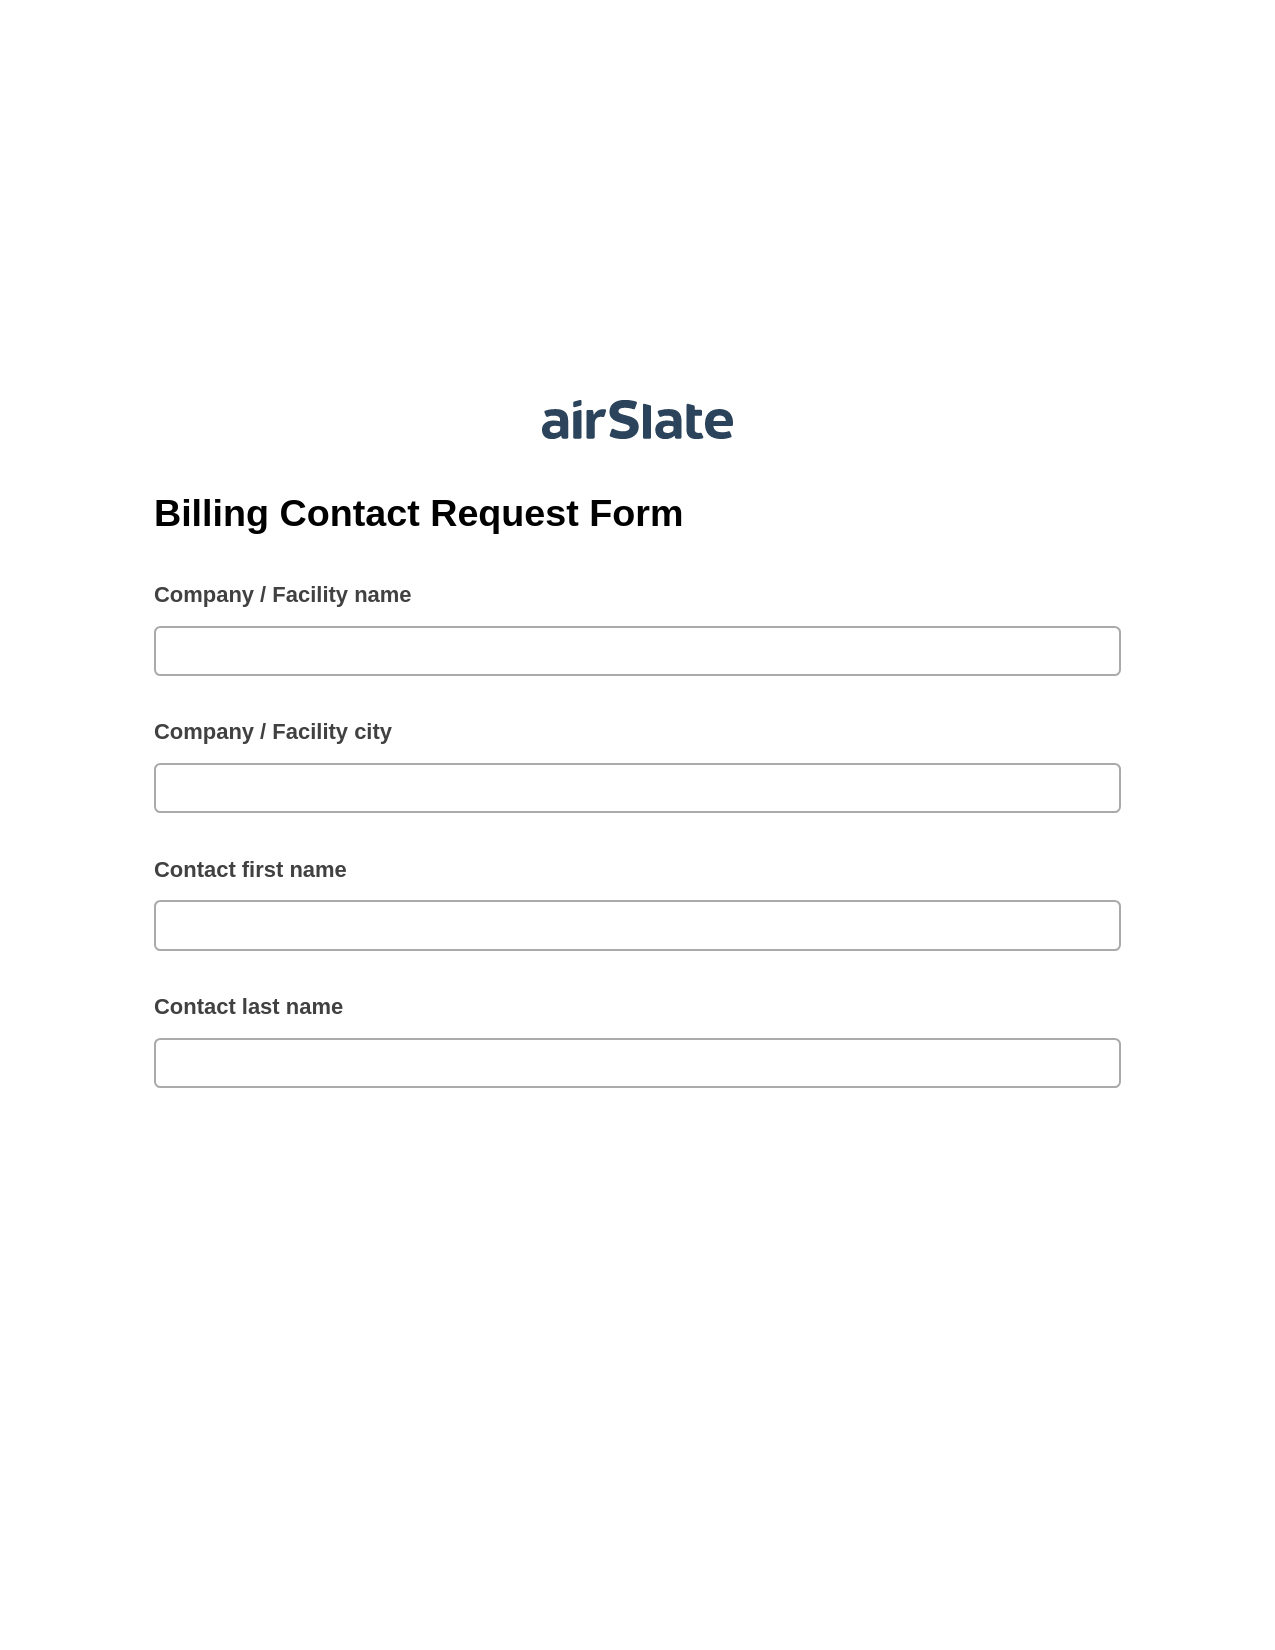 Billing Contact Request Form Pre-fill from CSV File Bot, Document Hide Bot, Export to MySQL Bot